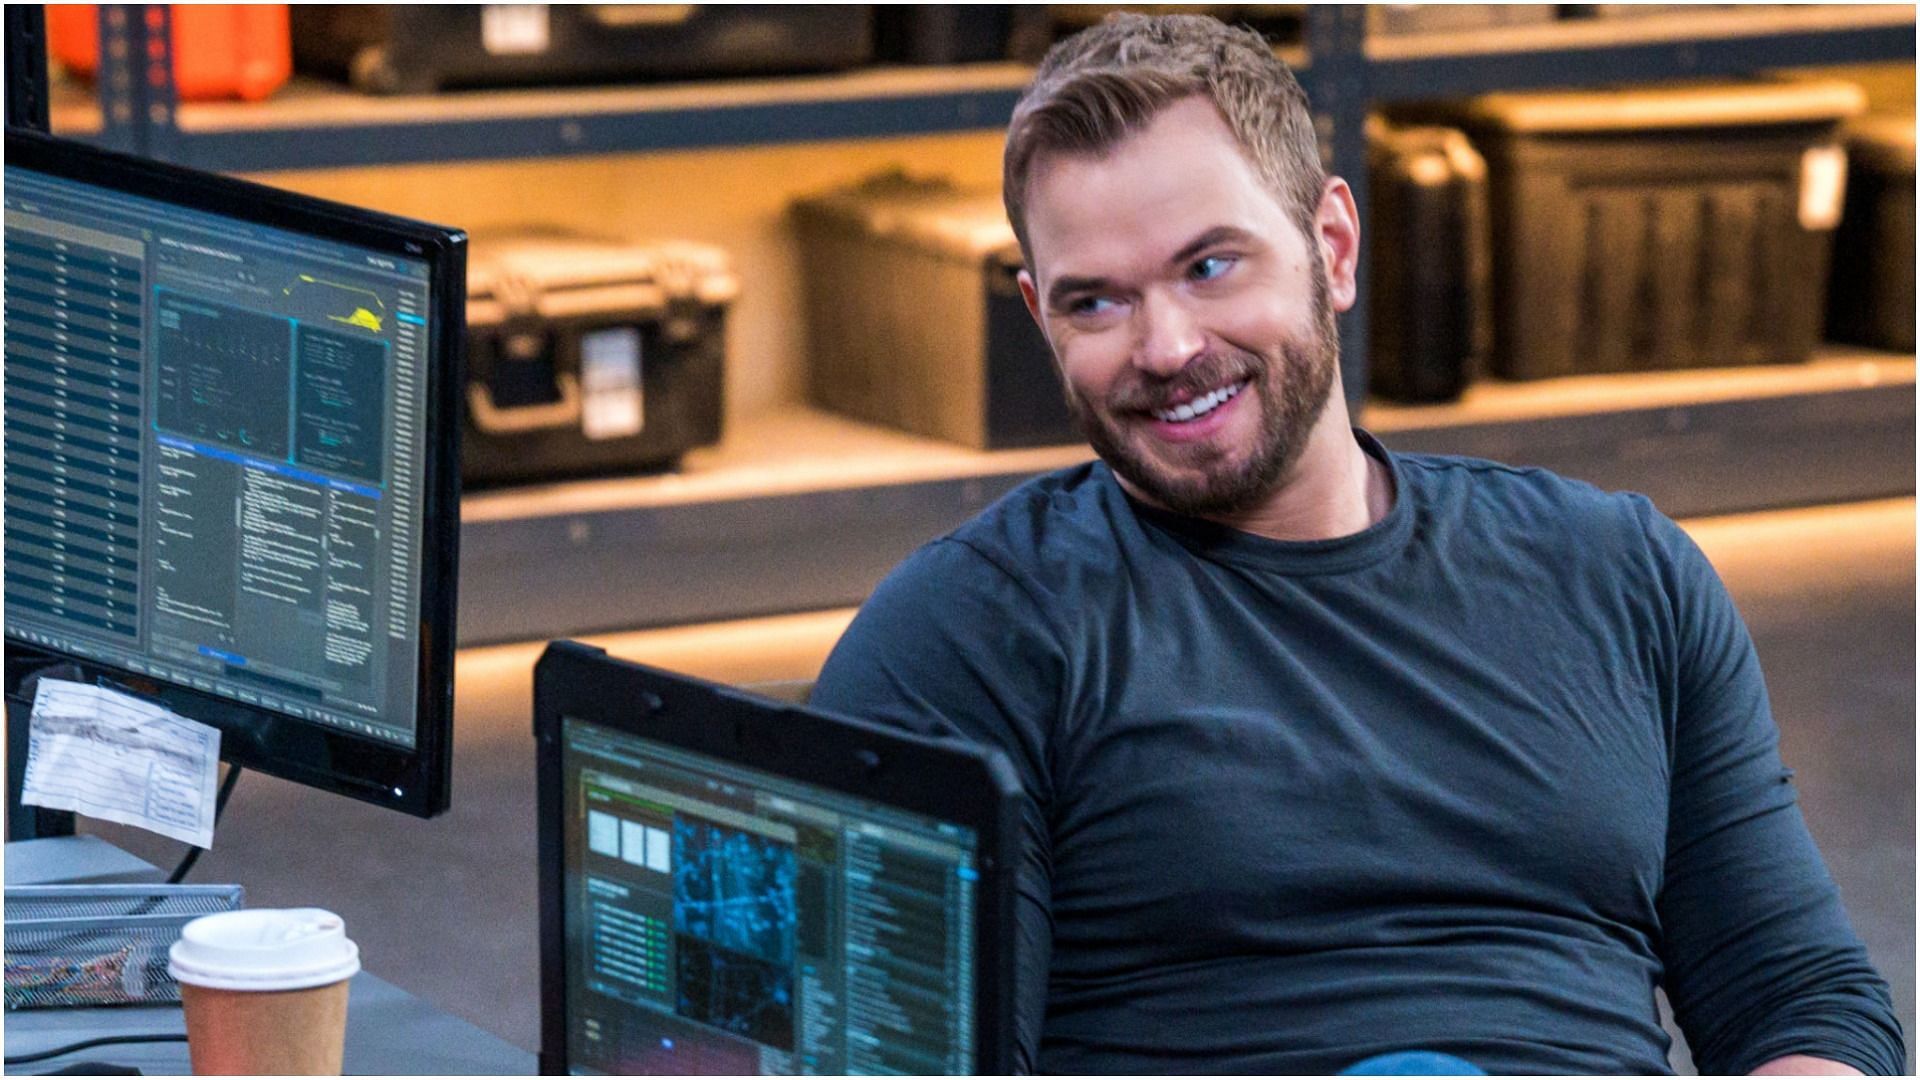 Kellan Lutz has appeared in several films and television series (Image via Mark Schafer/Getty Images)